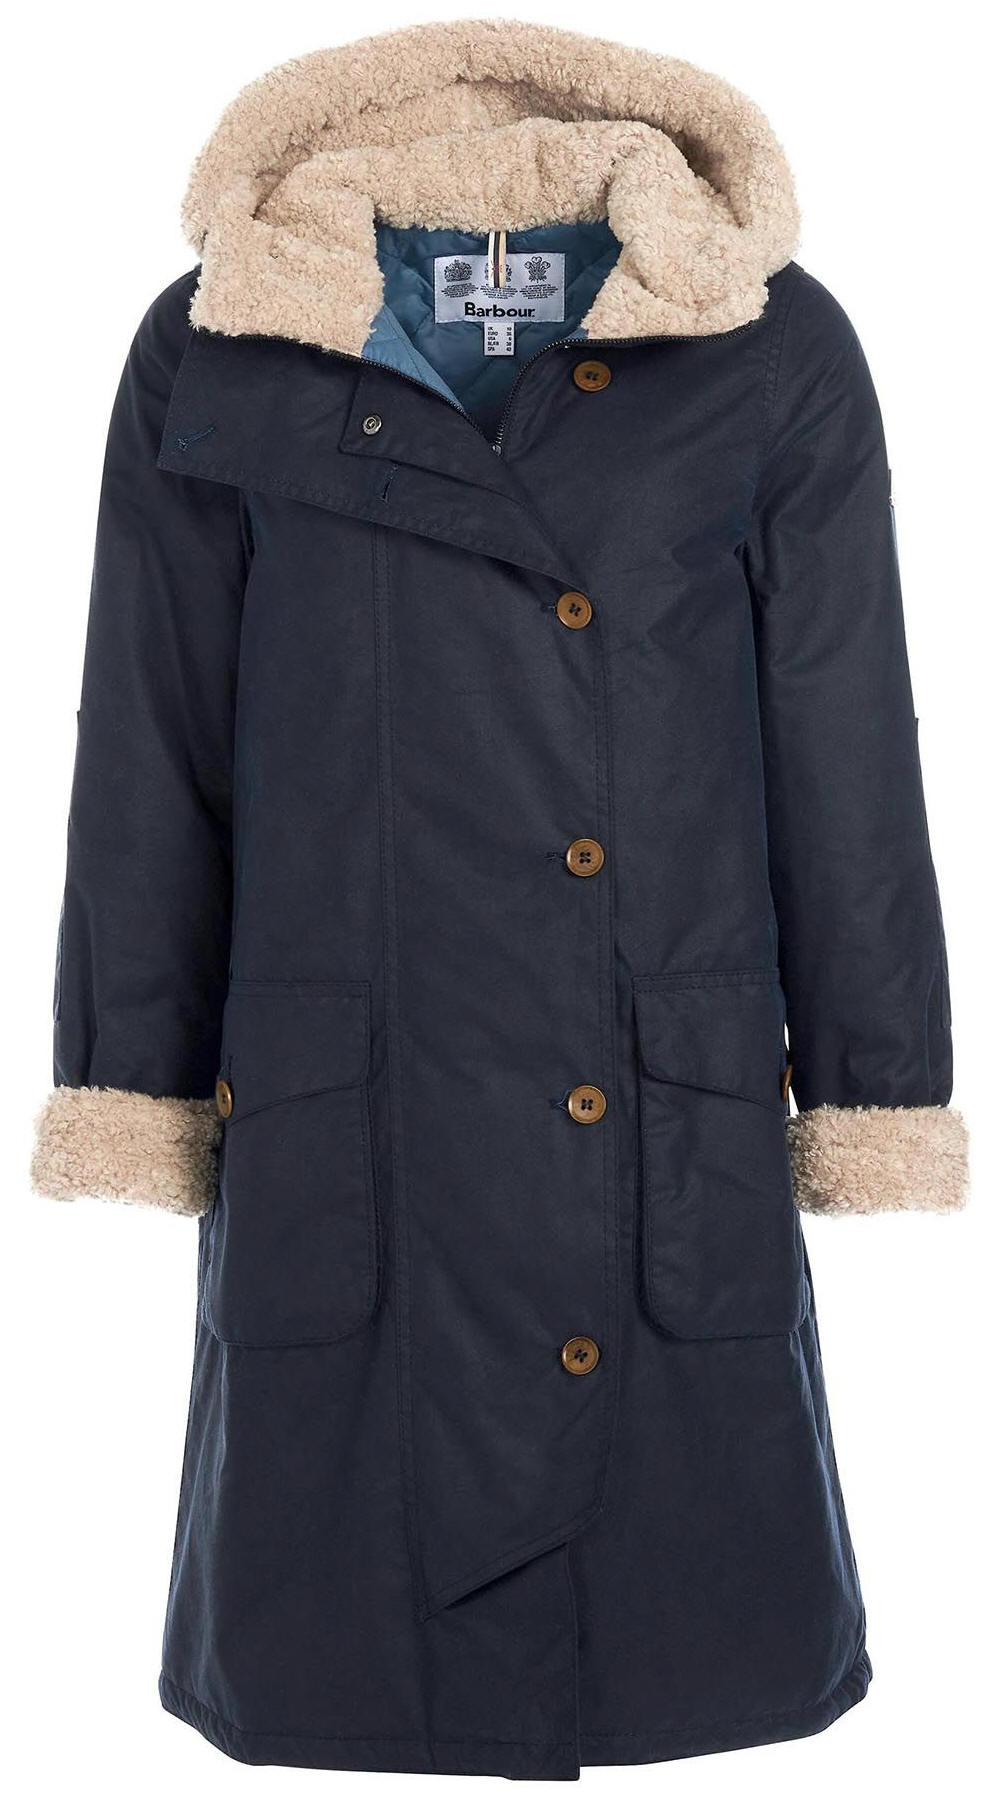 Barbour Womens Peregrine Wax Jacket Navy LWX1178NY71 | Red Rae Town ...